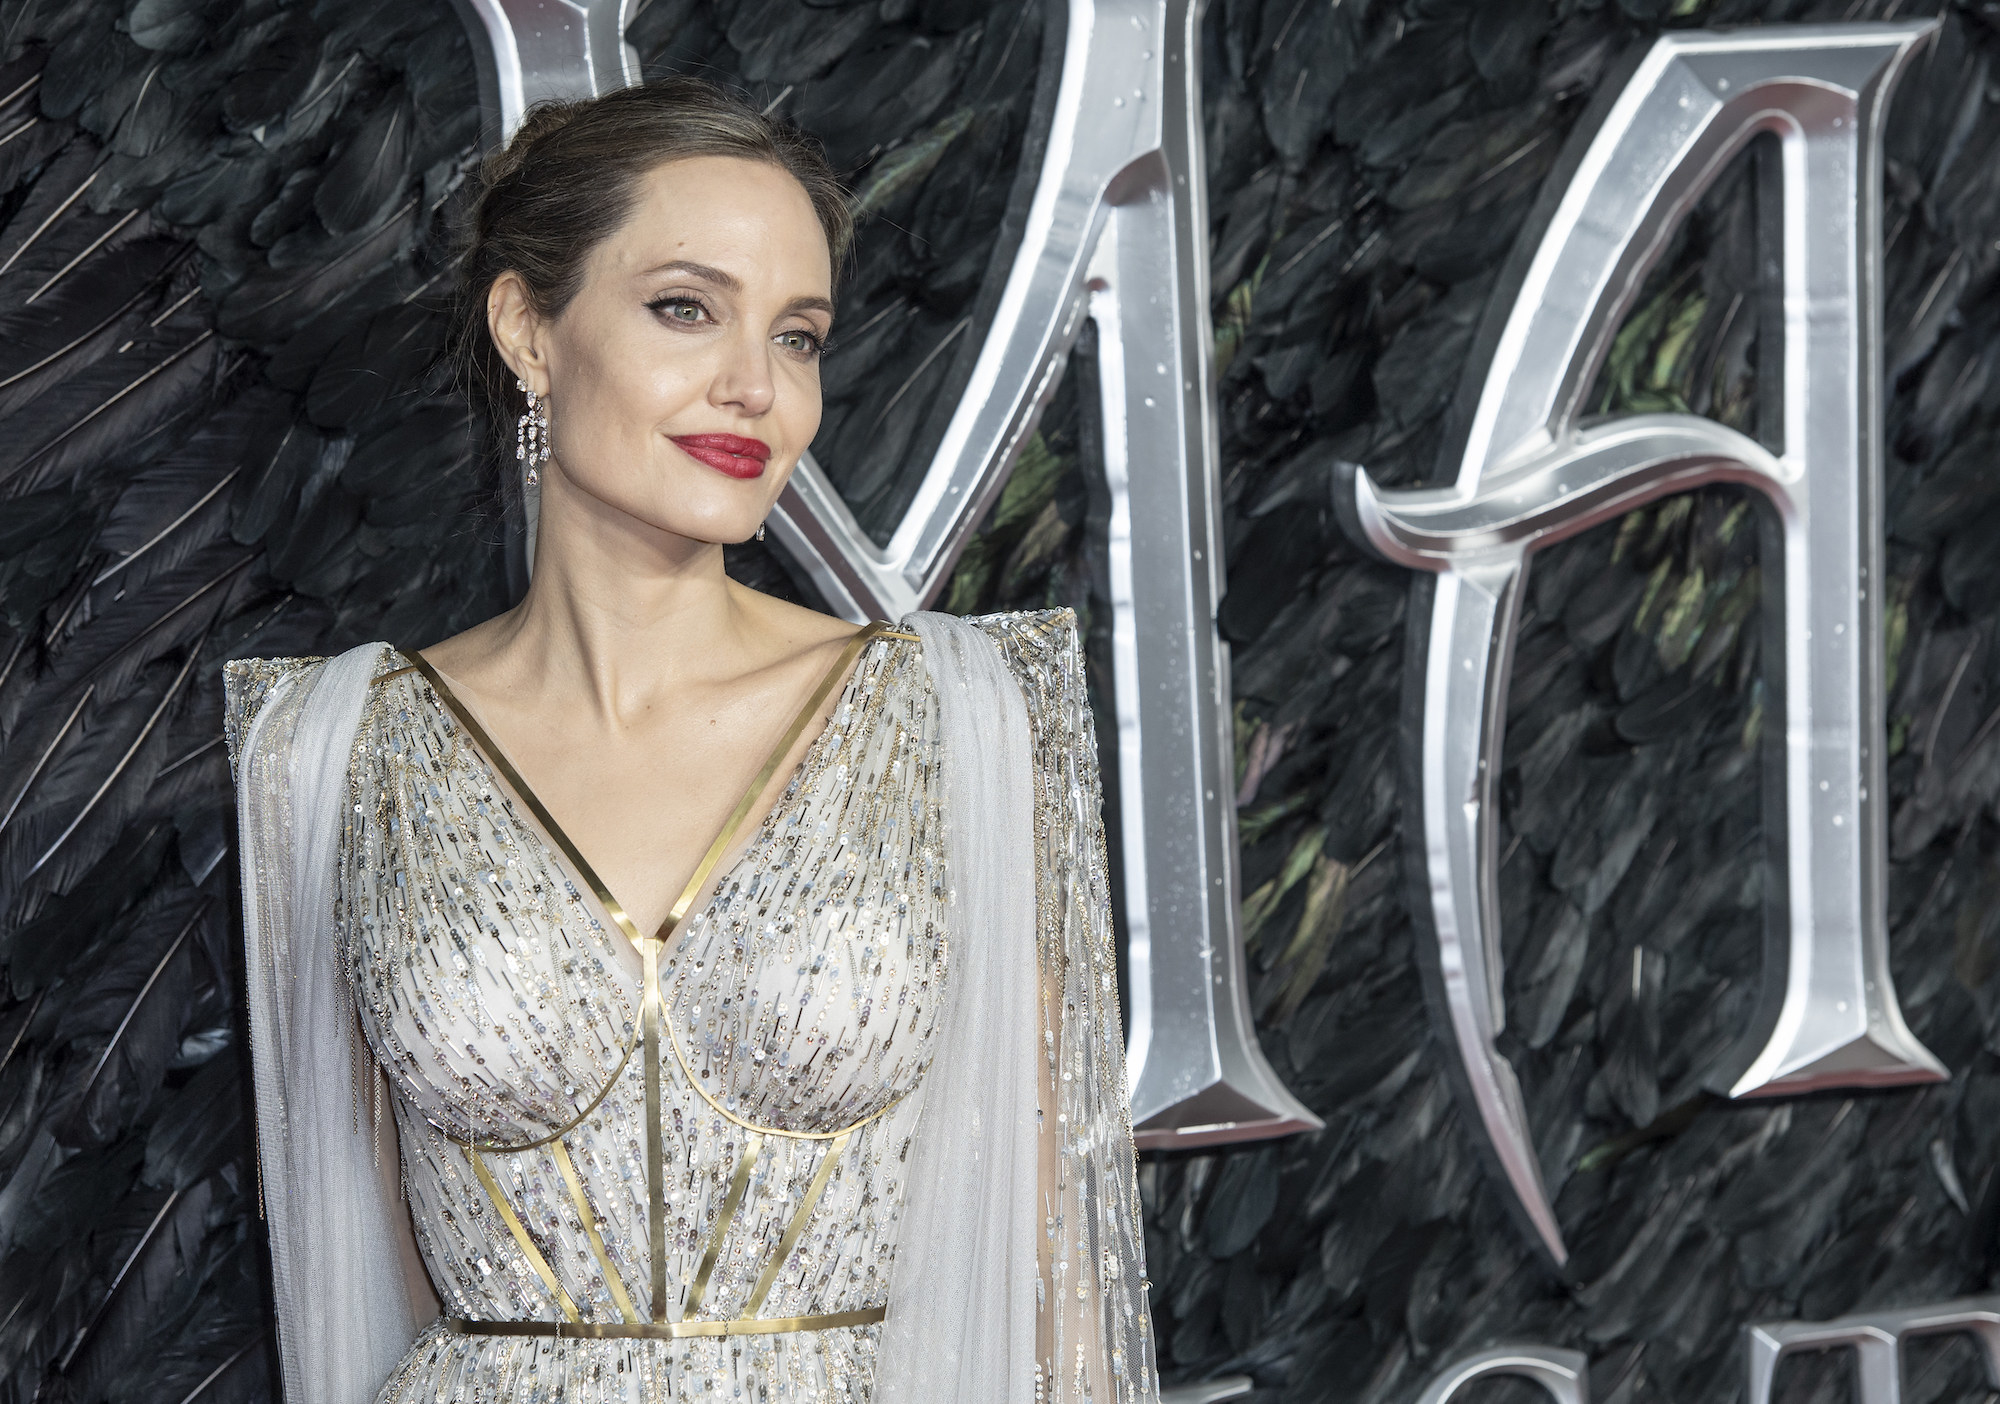 Angelina Jolie attends the ‘Maleficent: Mistress of Evil’ European Premiere at the BFI Imax, Waterloo